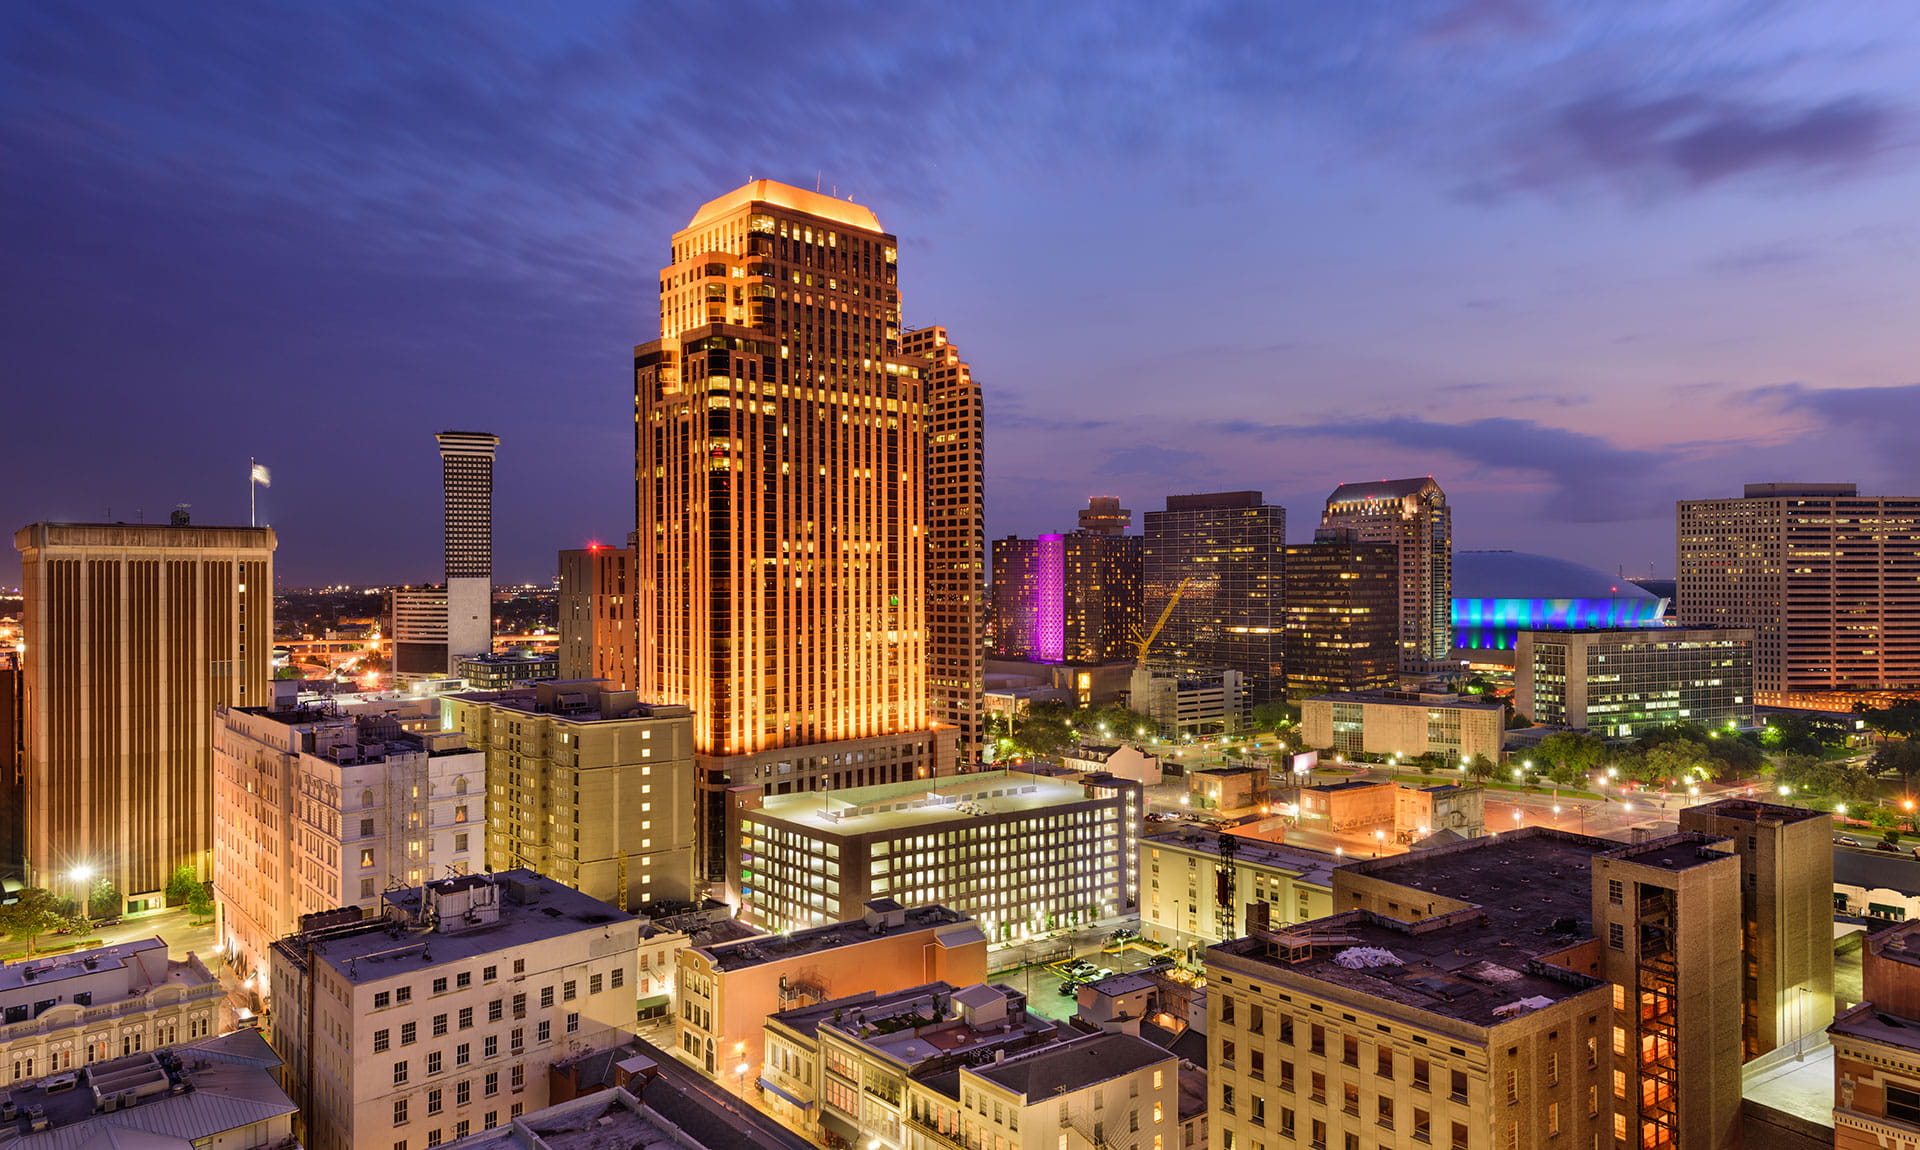 New Orleans Skyline at night